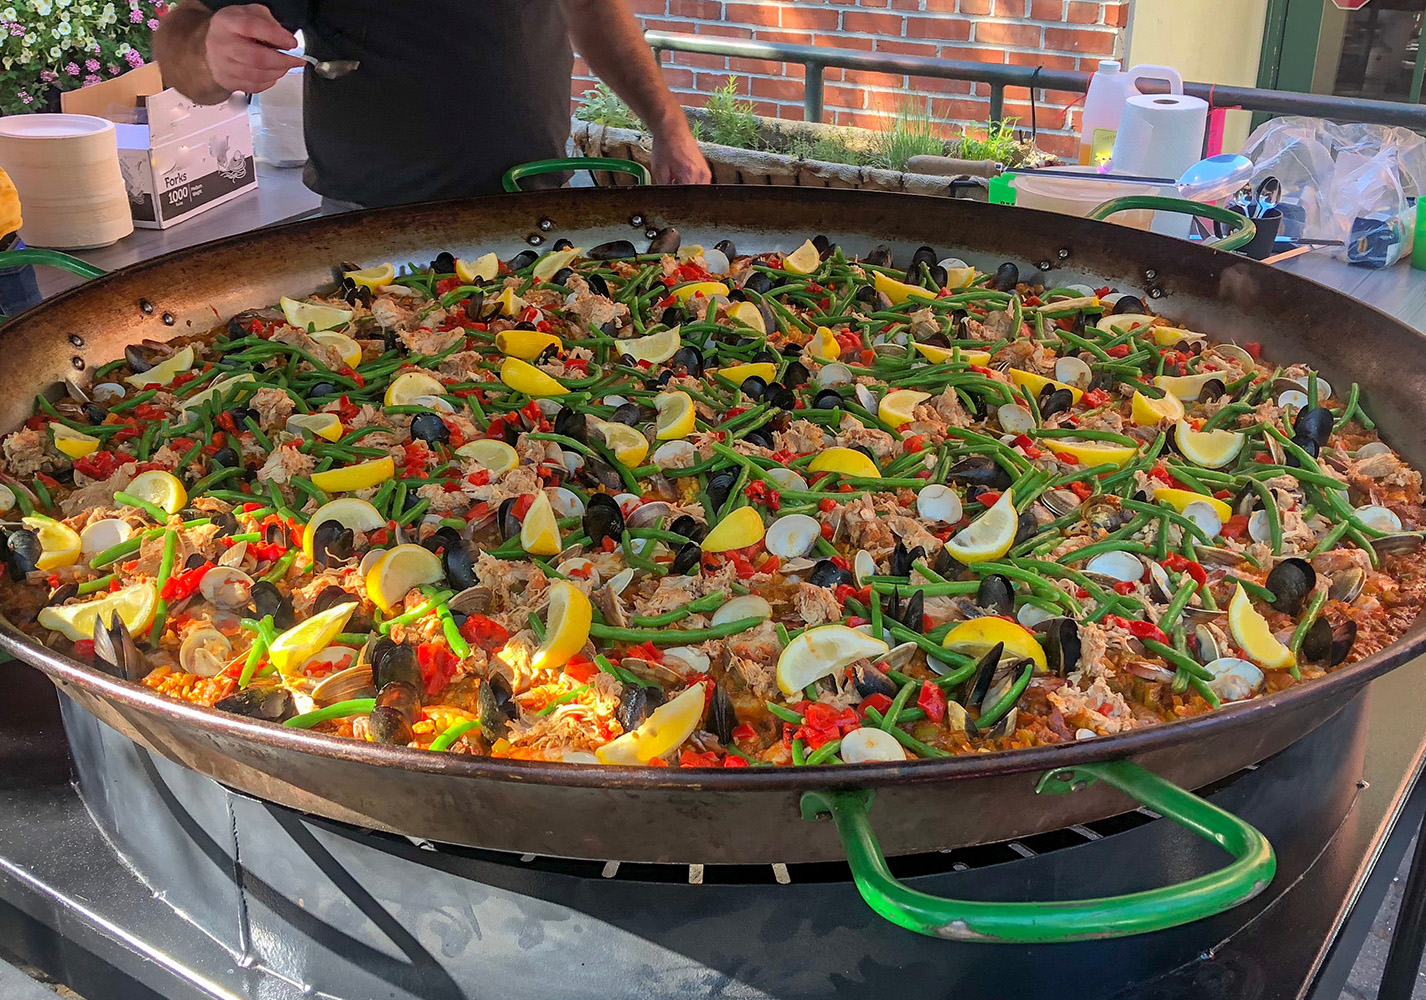 Dig into some Basque-style paella, served outside Boise’s Basque Market on select days. 